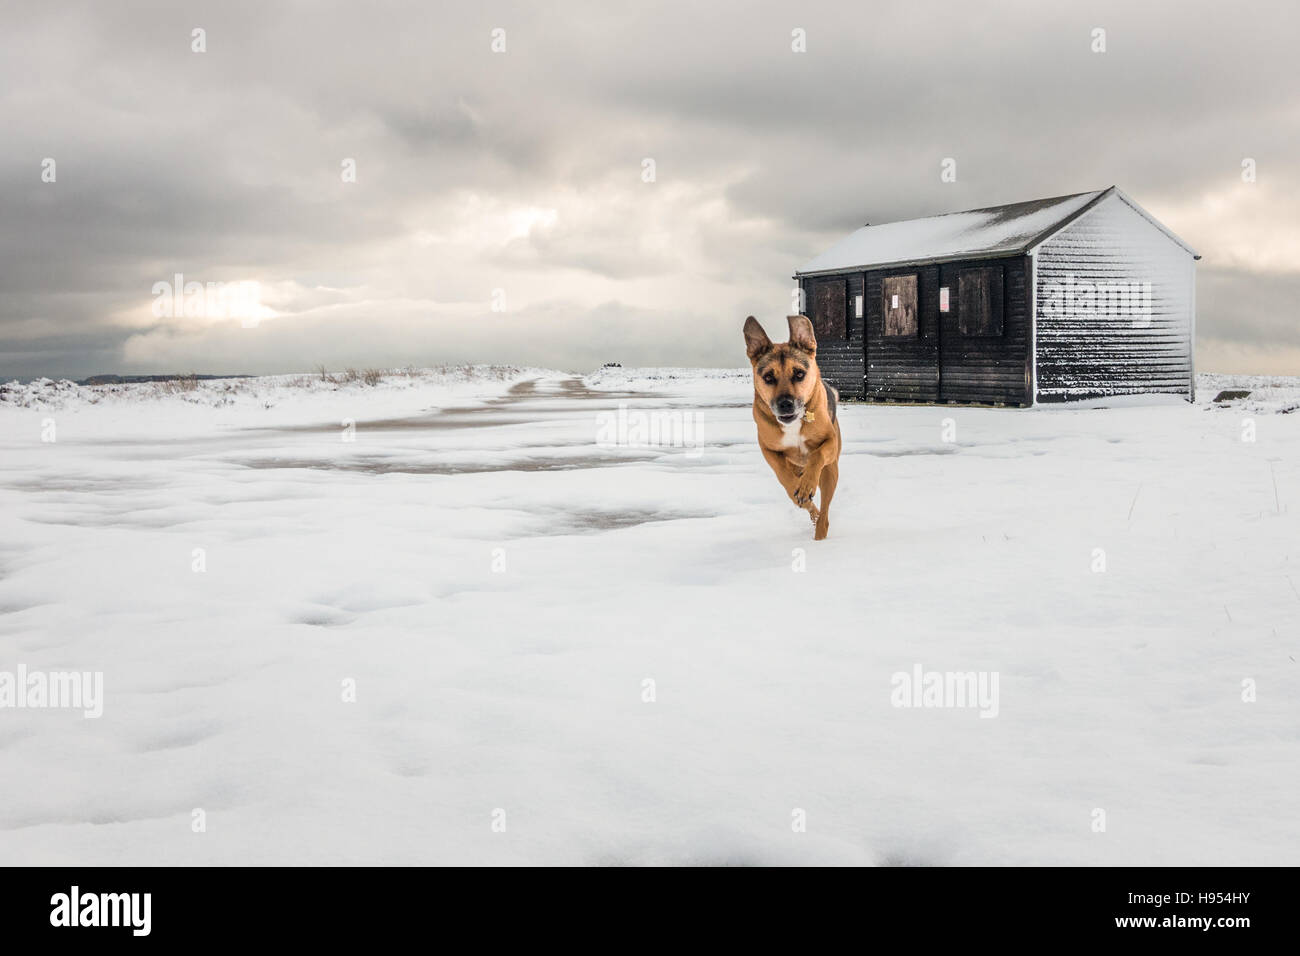 Pets: Leeds, West Yorkshire, UK. 18th November 2016. UK Weather. More snow hits the higher ground in Yorkshire countryside making a playground for dogs, Ilkley Moor, Ilkley, UK. Rebecca Cole/Alamy Live News Stock Photo